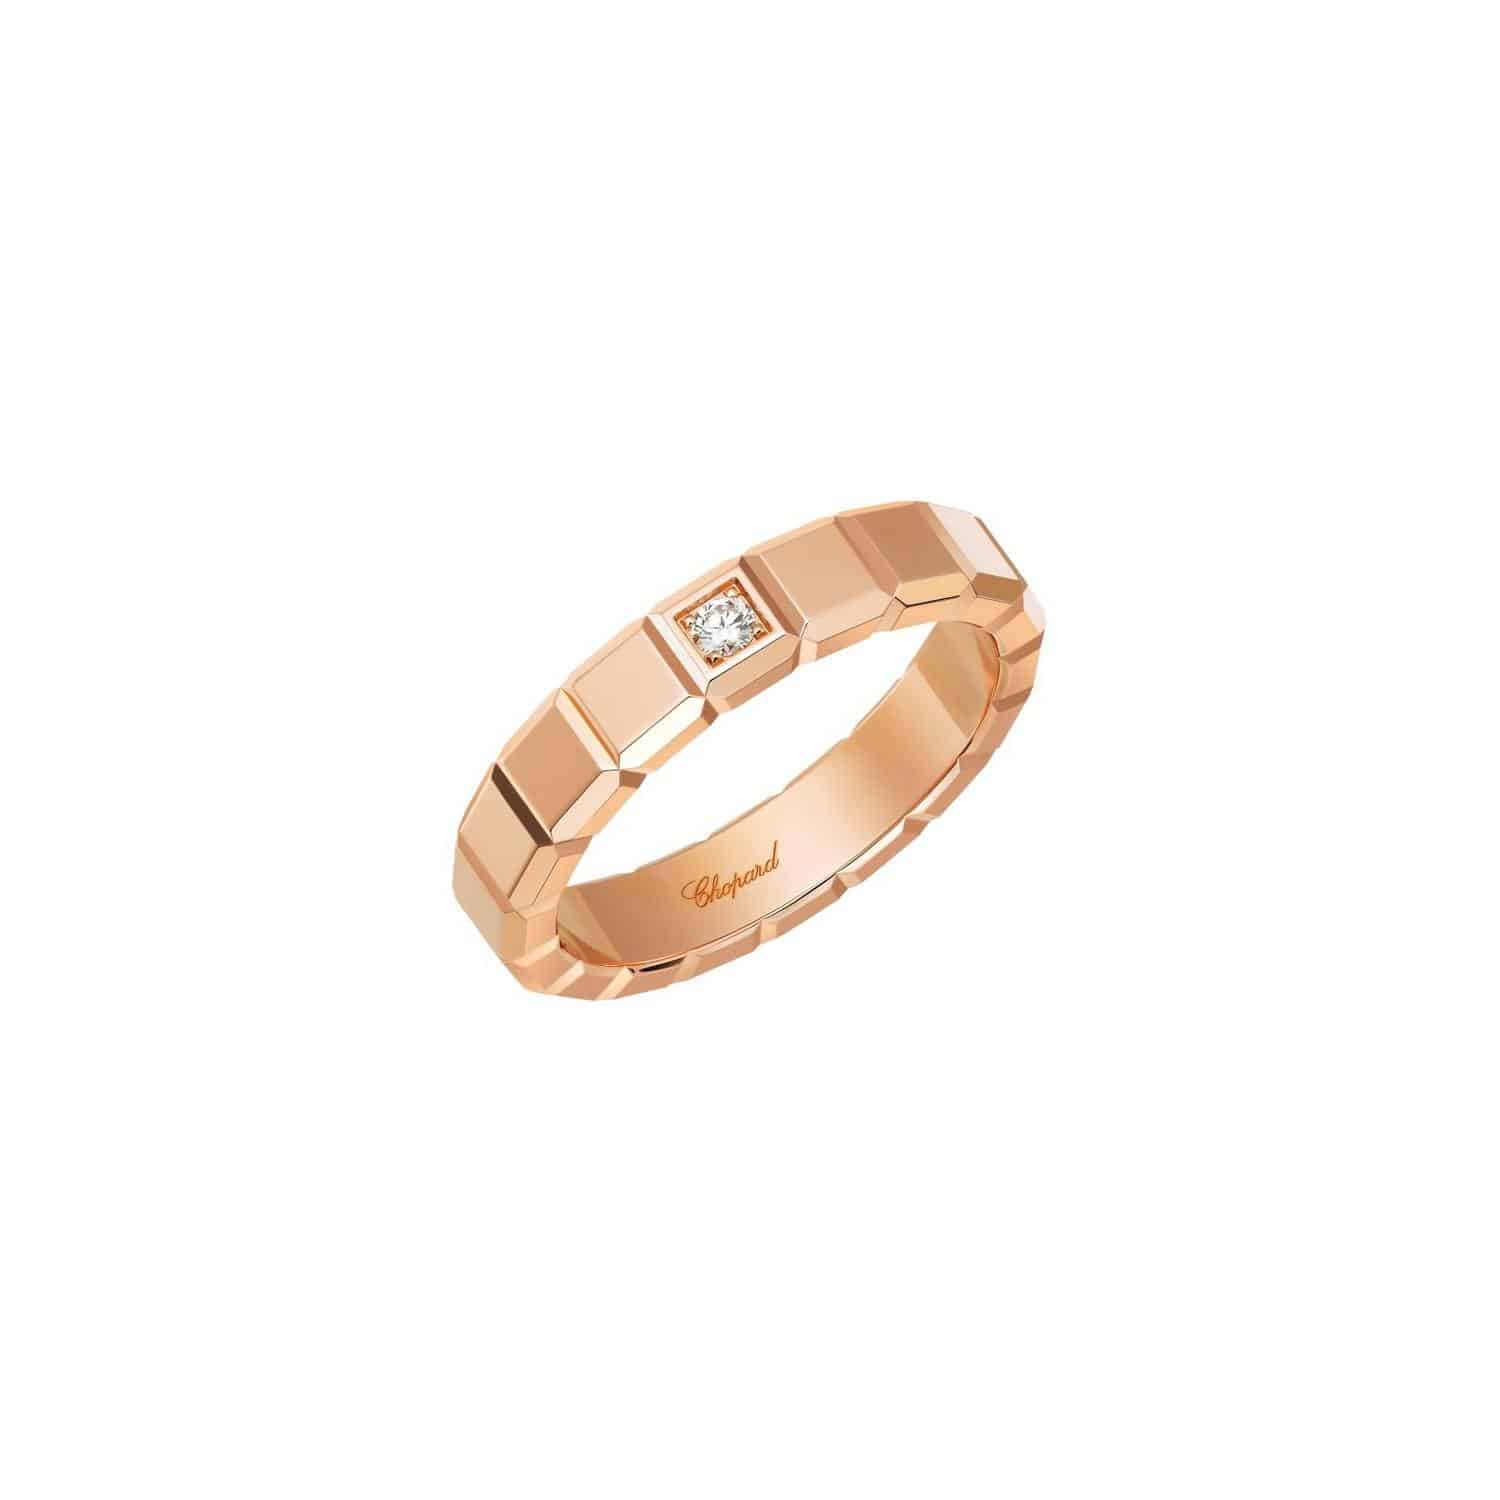 CHOPARD RING ICE CUBE - 829834-5071